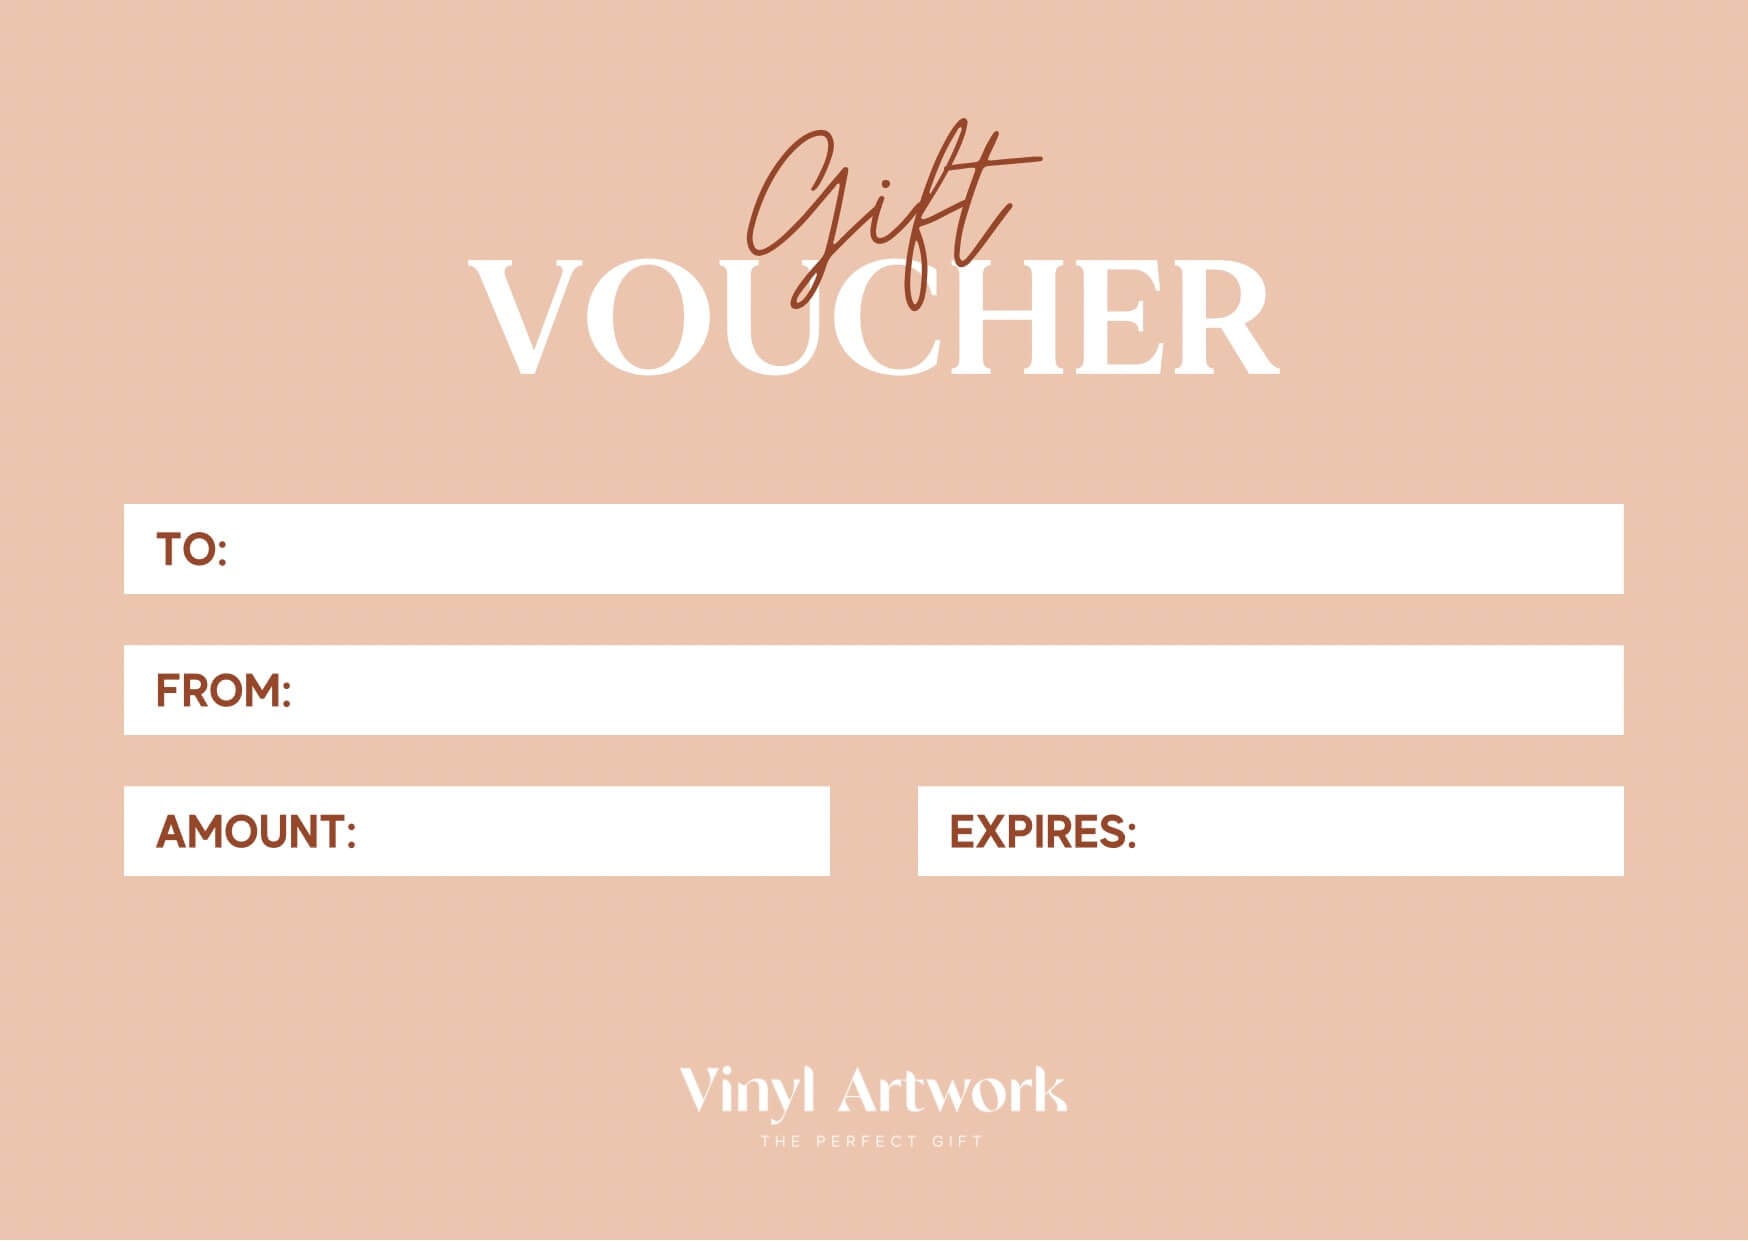 Customizable Gift Card Perfect for Any Occasion - Vinyl Artwork